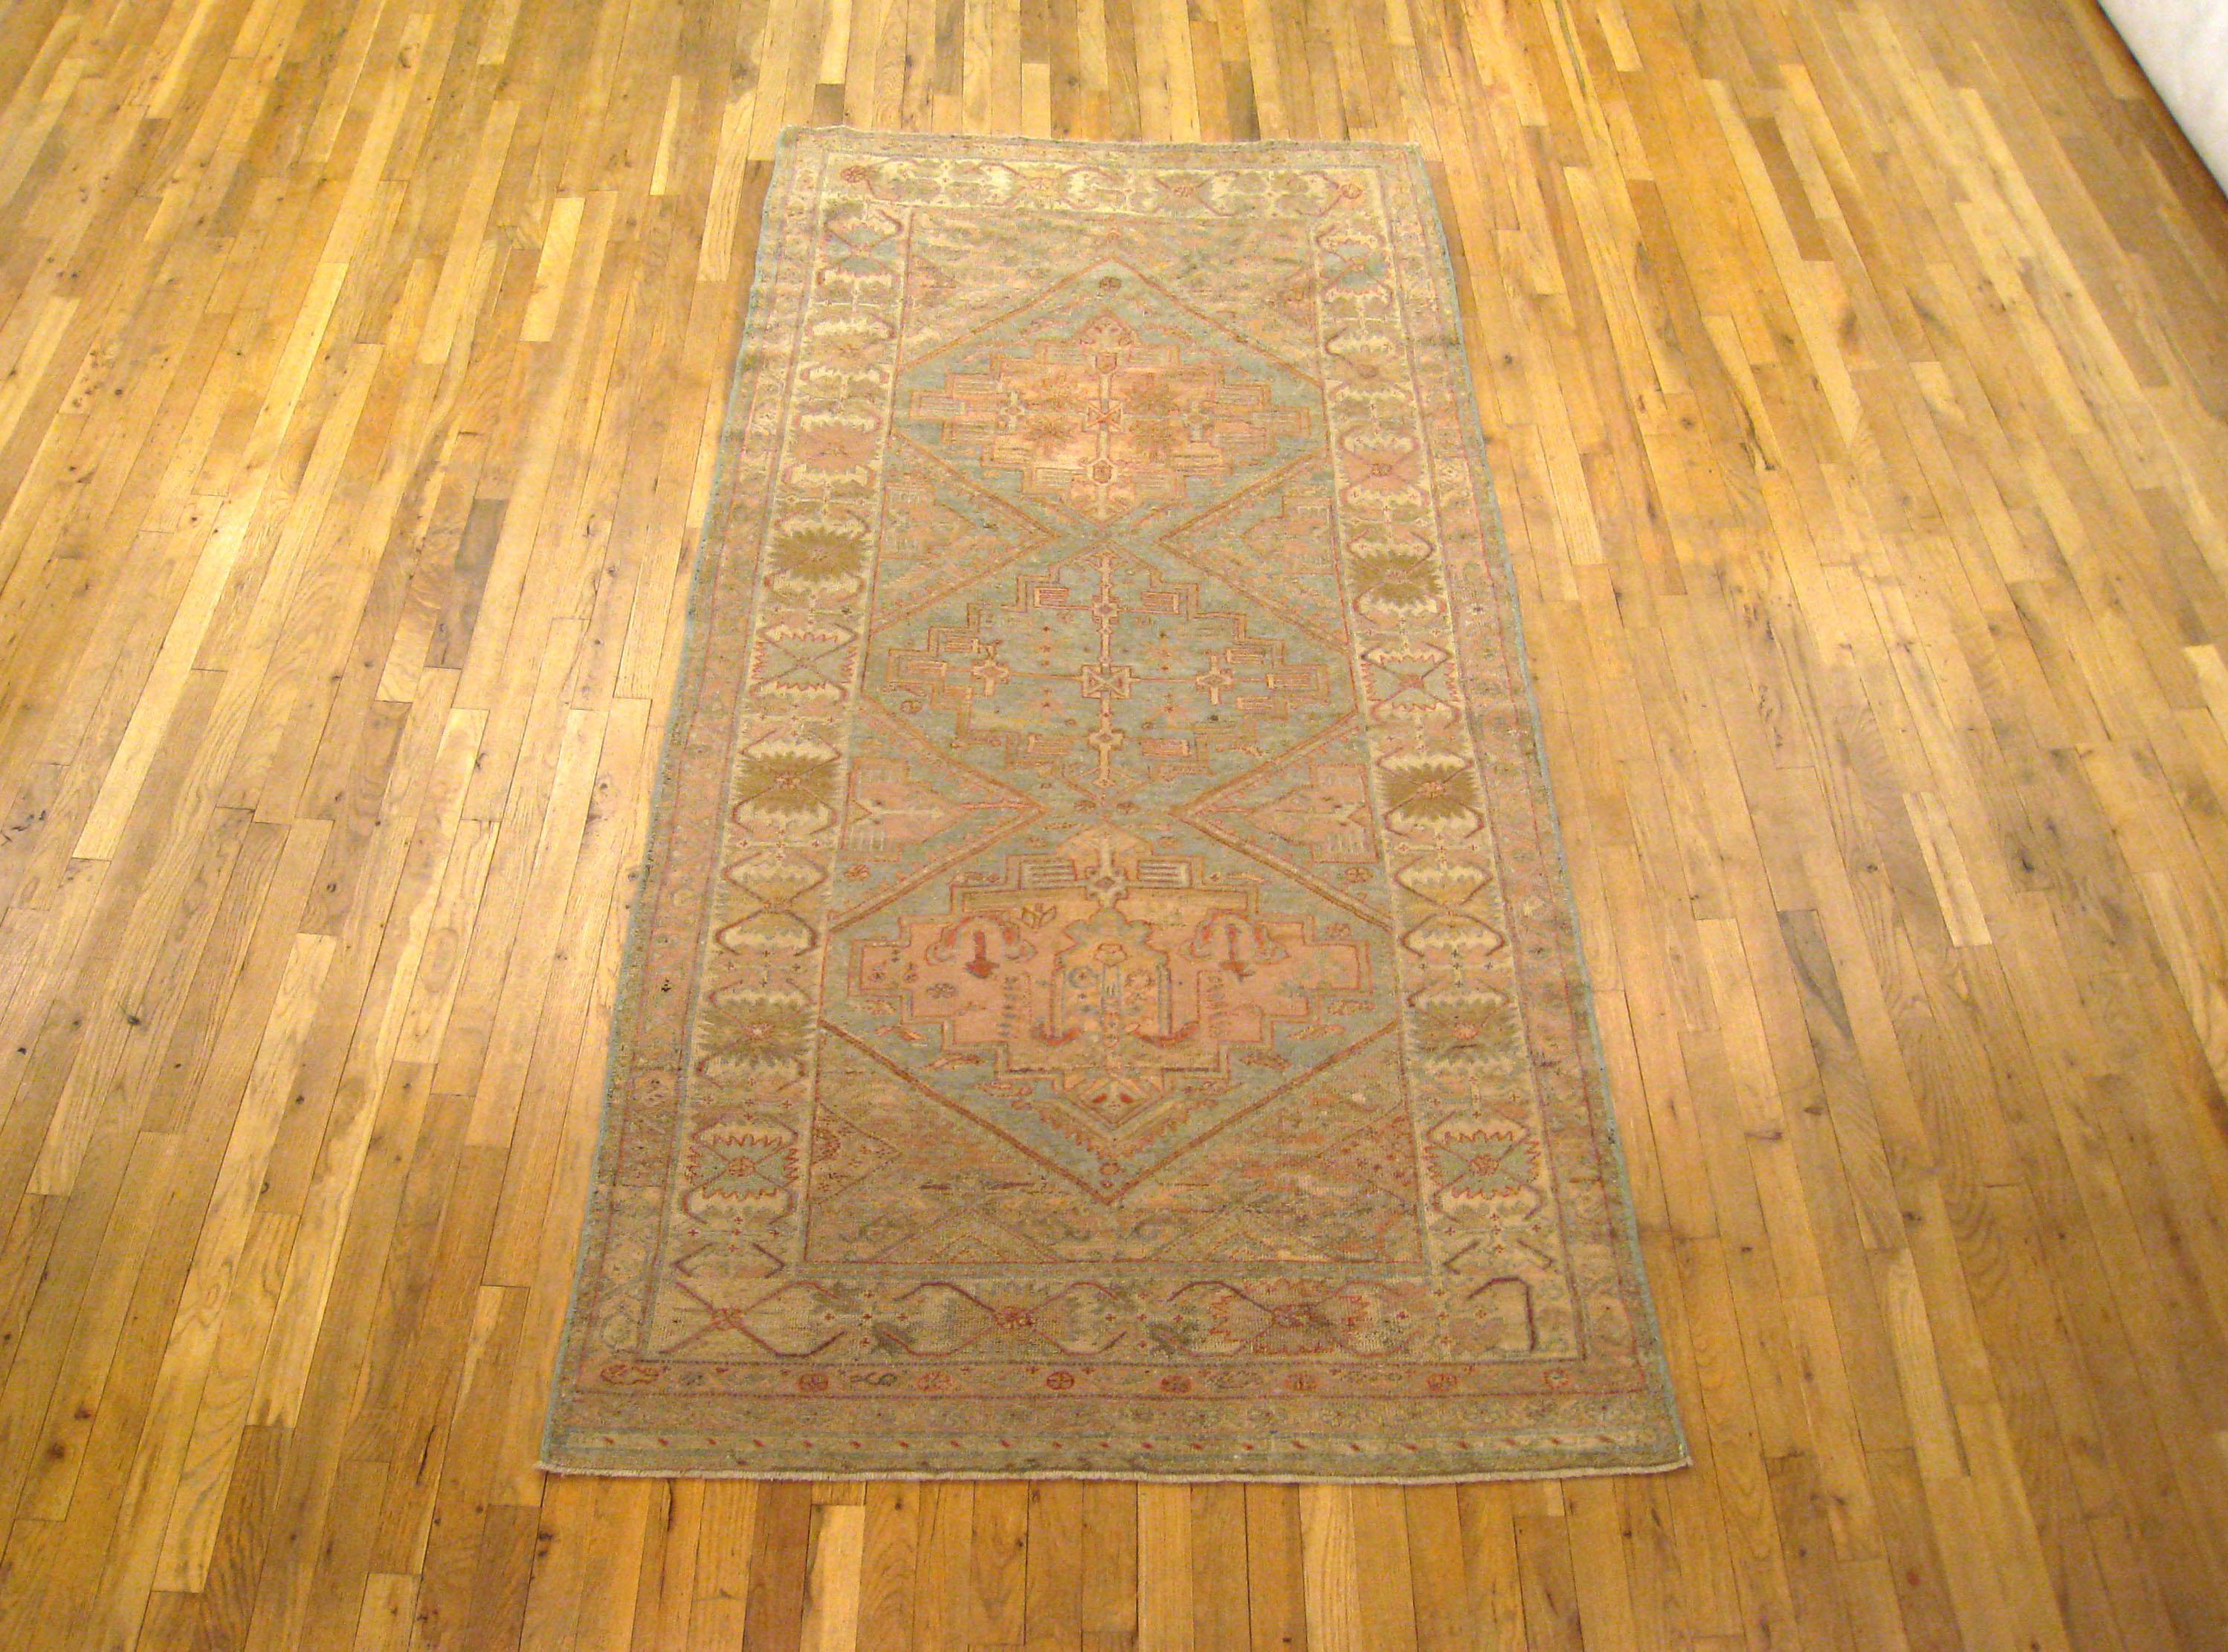 An antique North West Persian decorative oriental carpet, size 8'8 x 4'2, circa 1900. This lovely hand-woven rug features three interconnected diamond shaped cartouches at the center of the softly hued primary field, enclosed within an ivory border